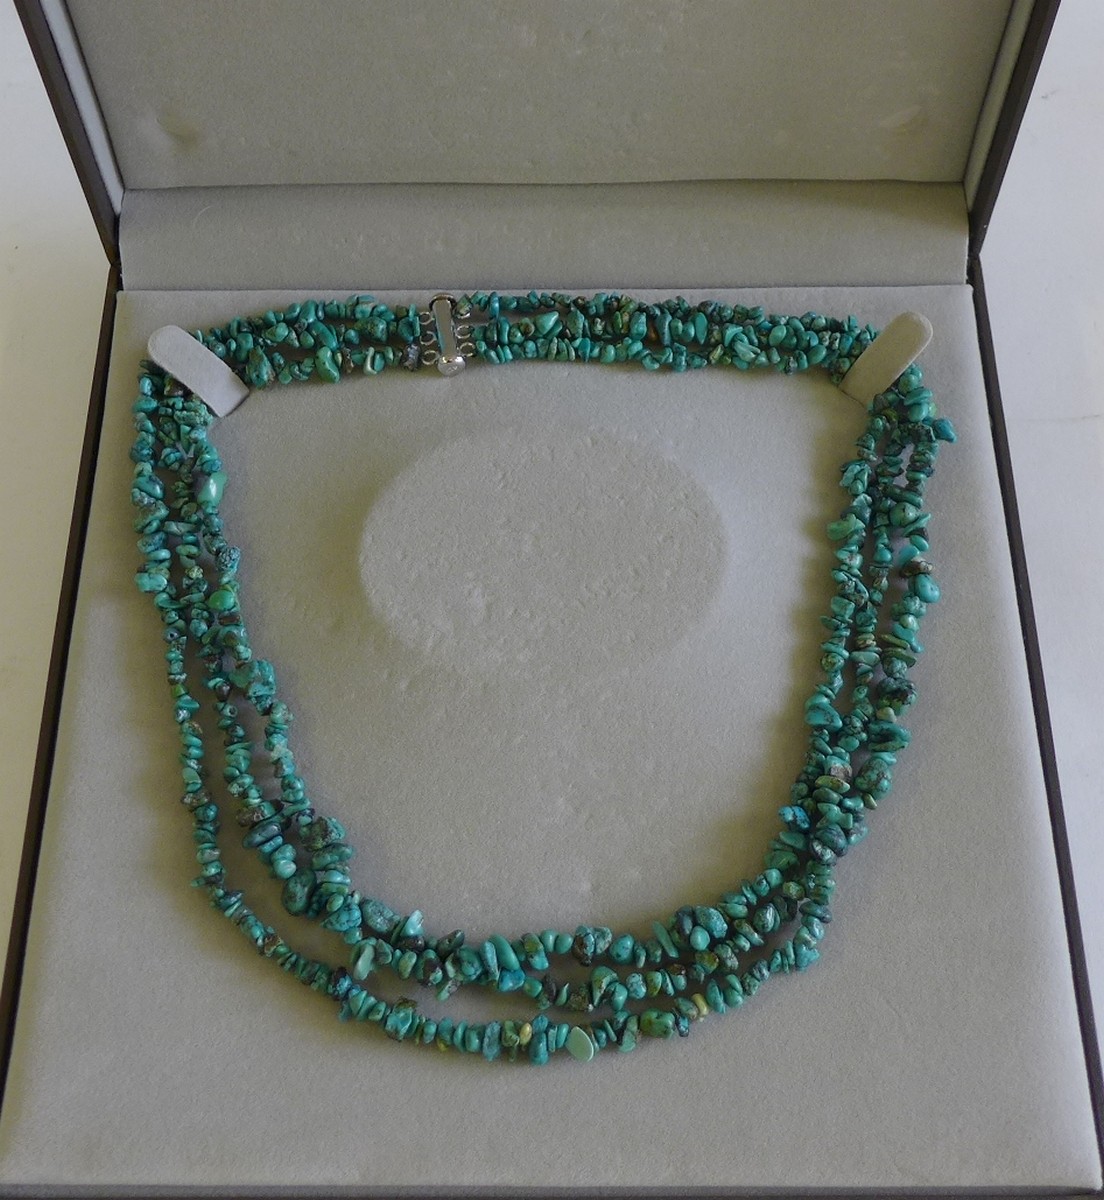 A triple strand turquoise matrix necklace with silver clasp in a fitted box